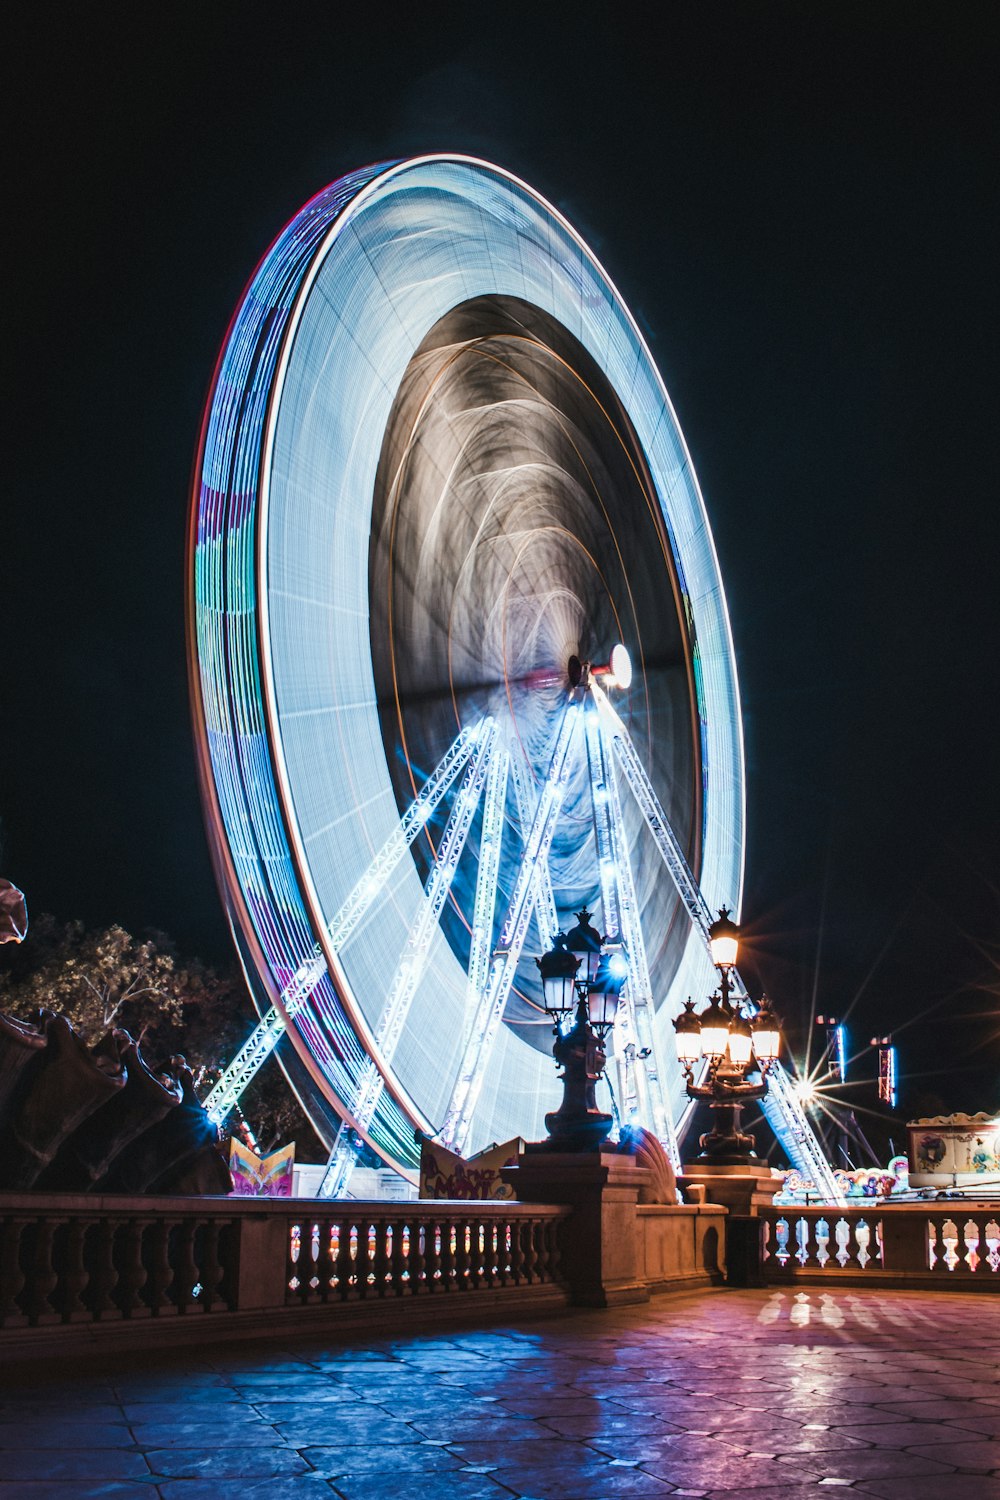 people walking on stairs near white and blue ferris wheel during nighttime